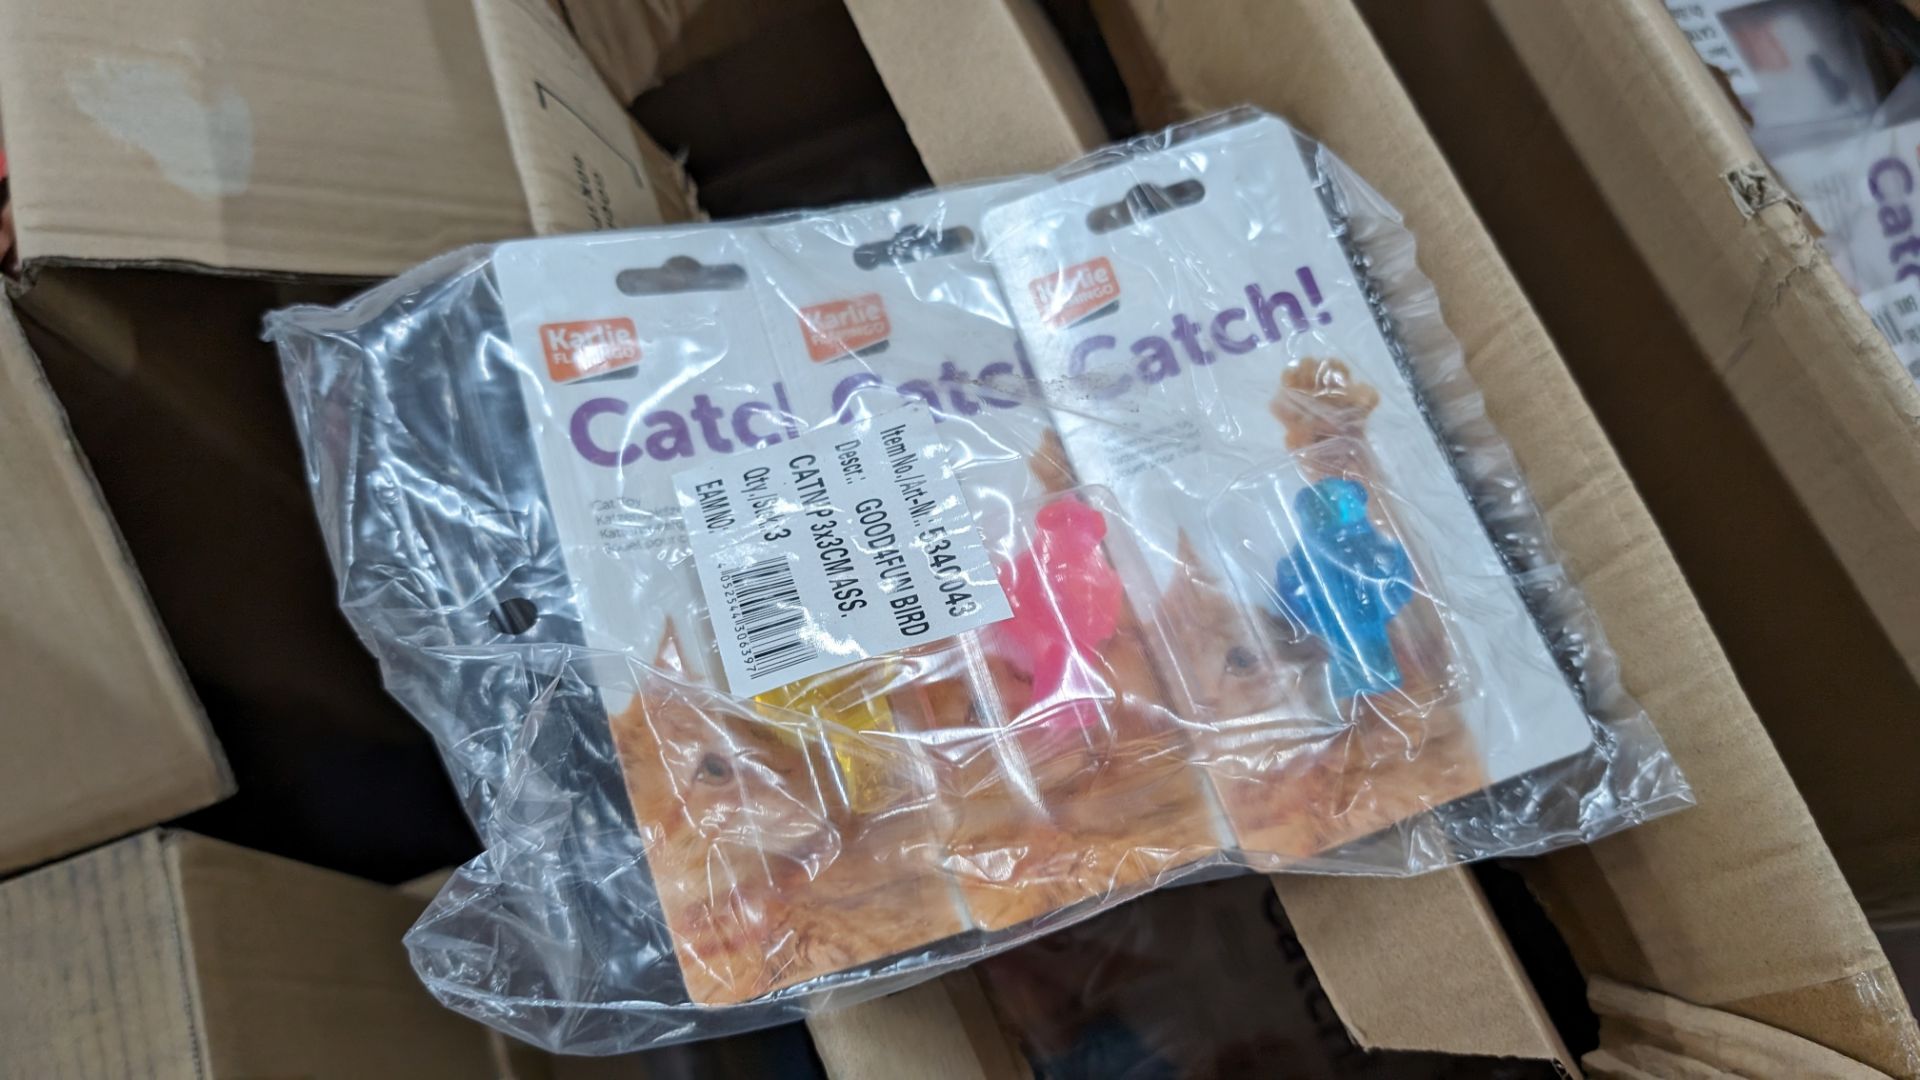 Box of Catch cat toys - assorted colours - Image 2 of 6